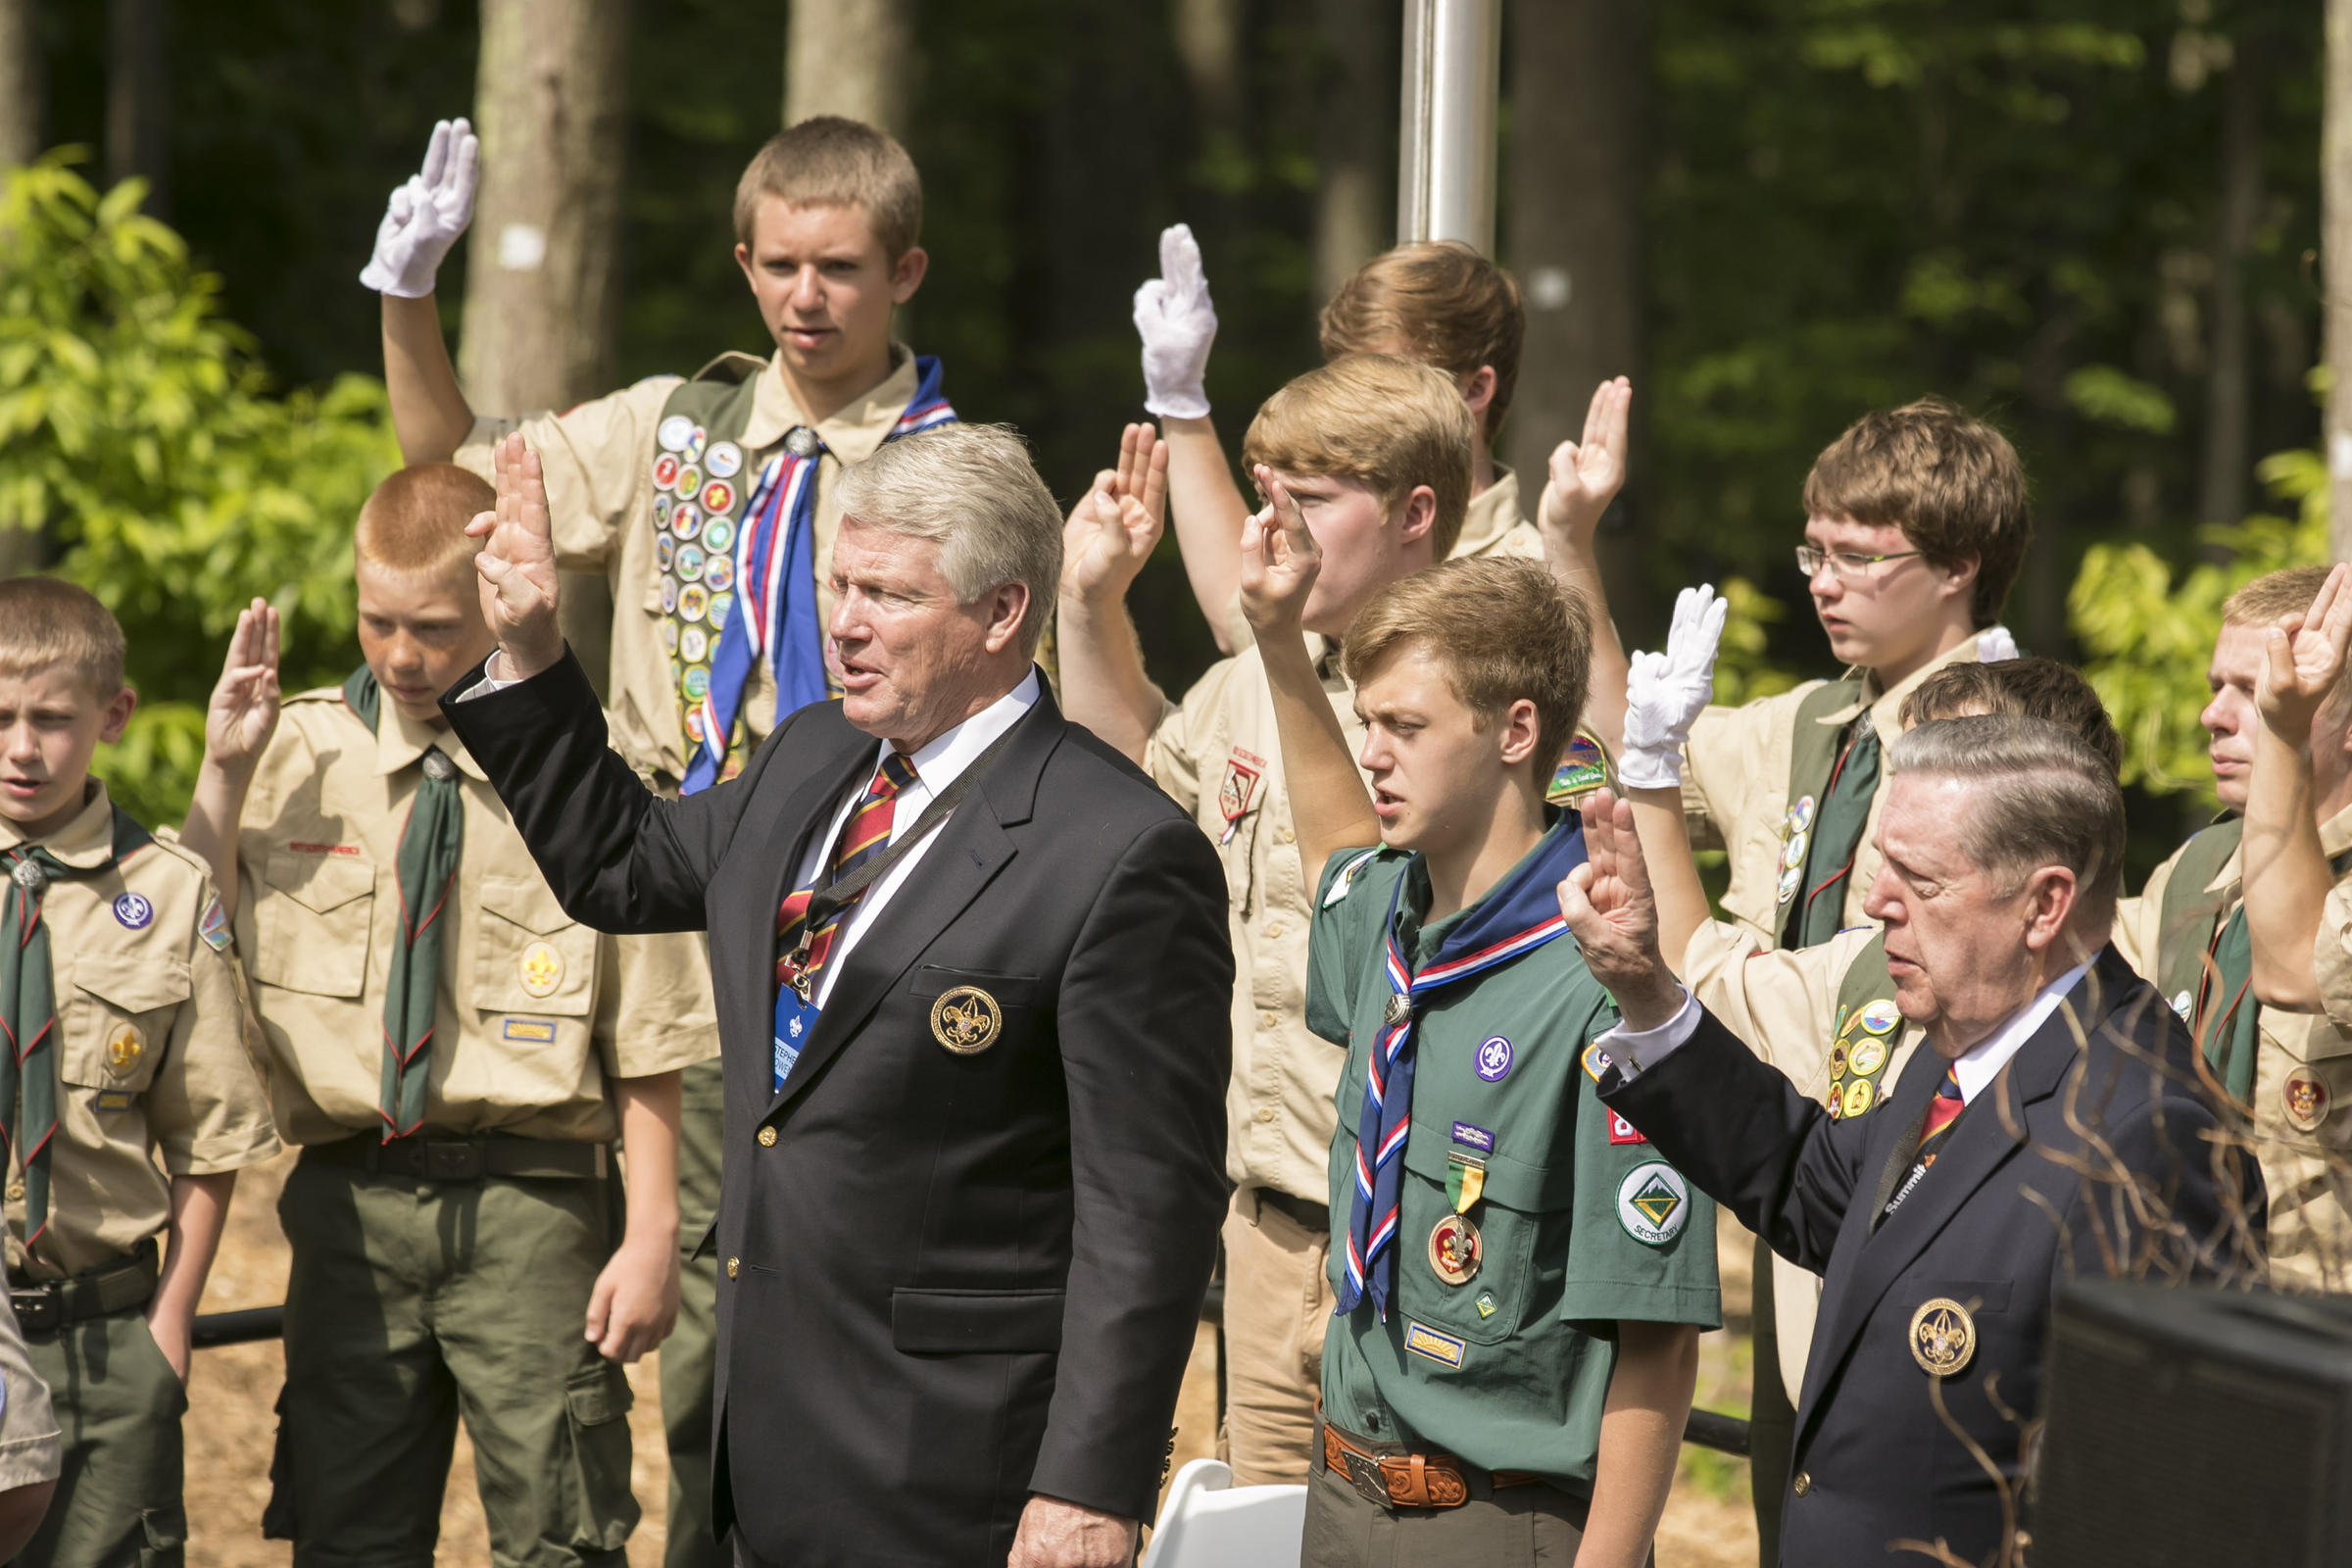 Boy Scouts Lds Split Brings Relief To Some Sadness To Others Kuer 901 5363